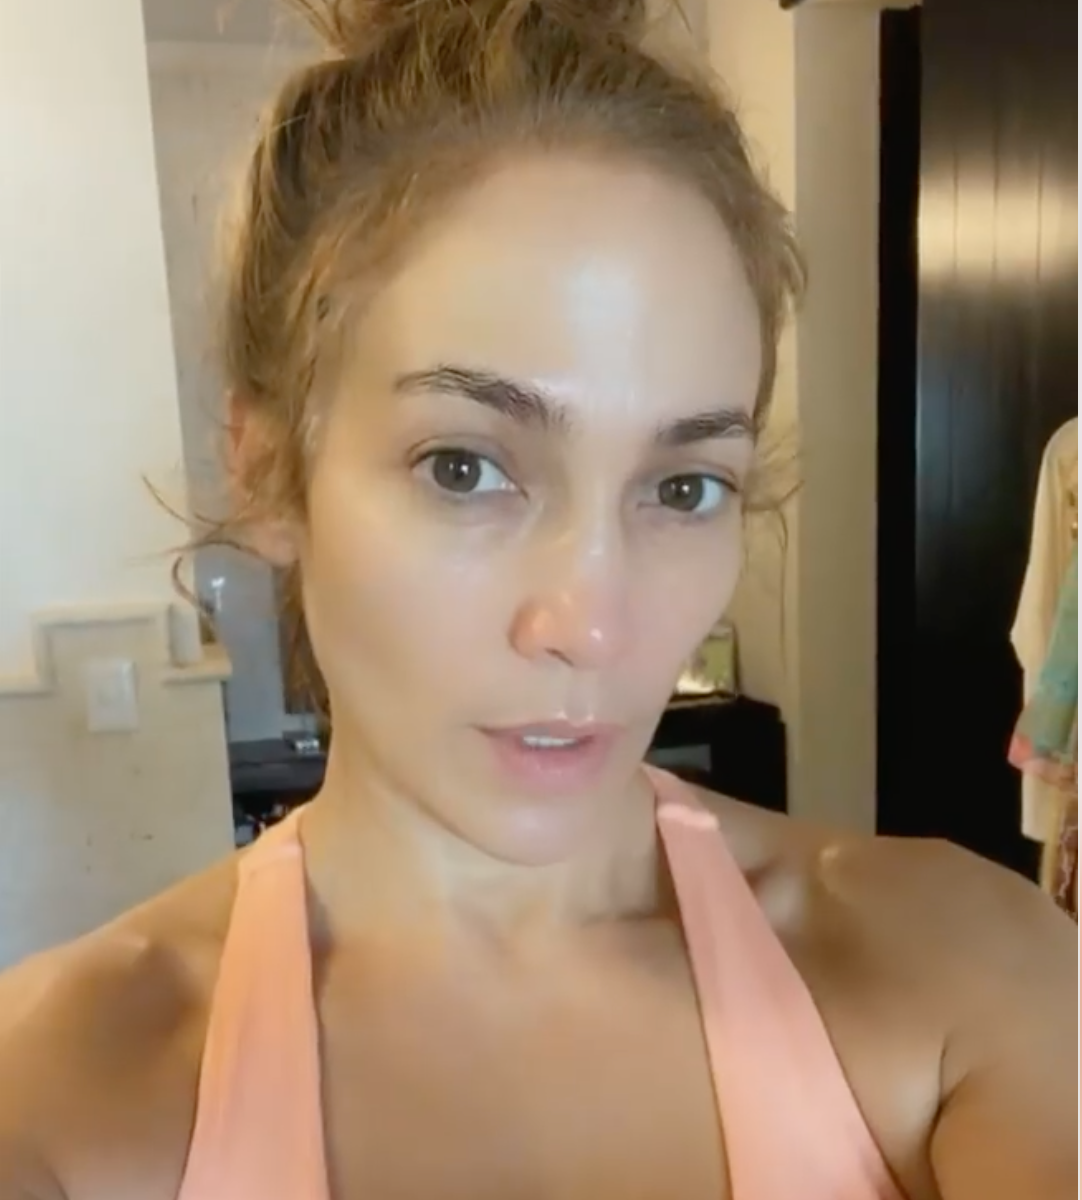 Jennifer Lopez Without Makeup: All the Times the Singer Has Gone